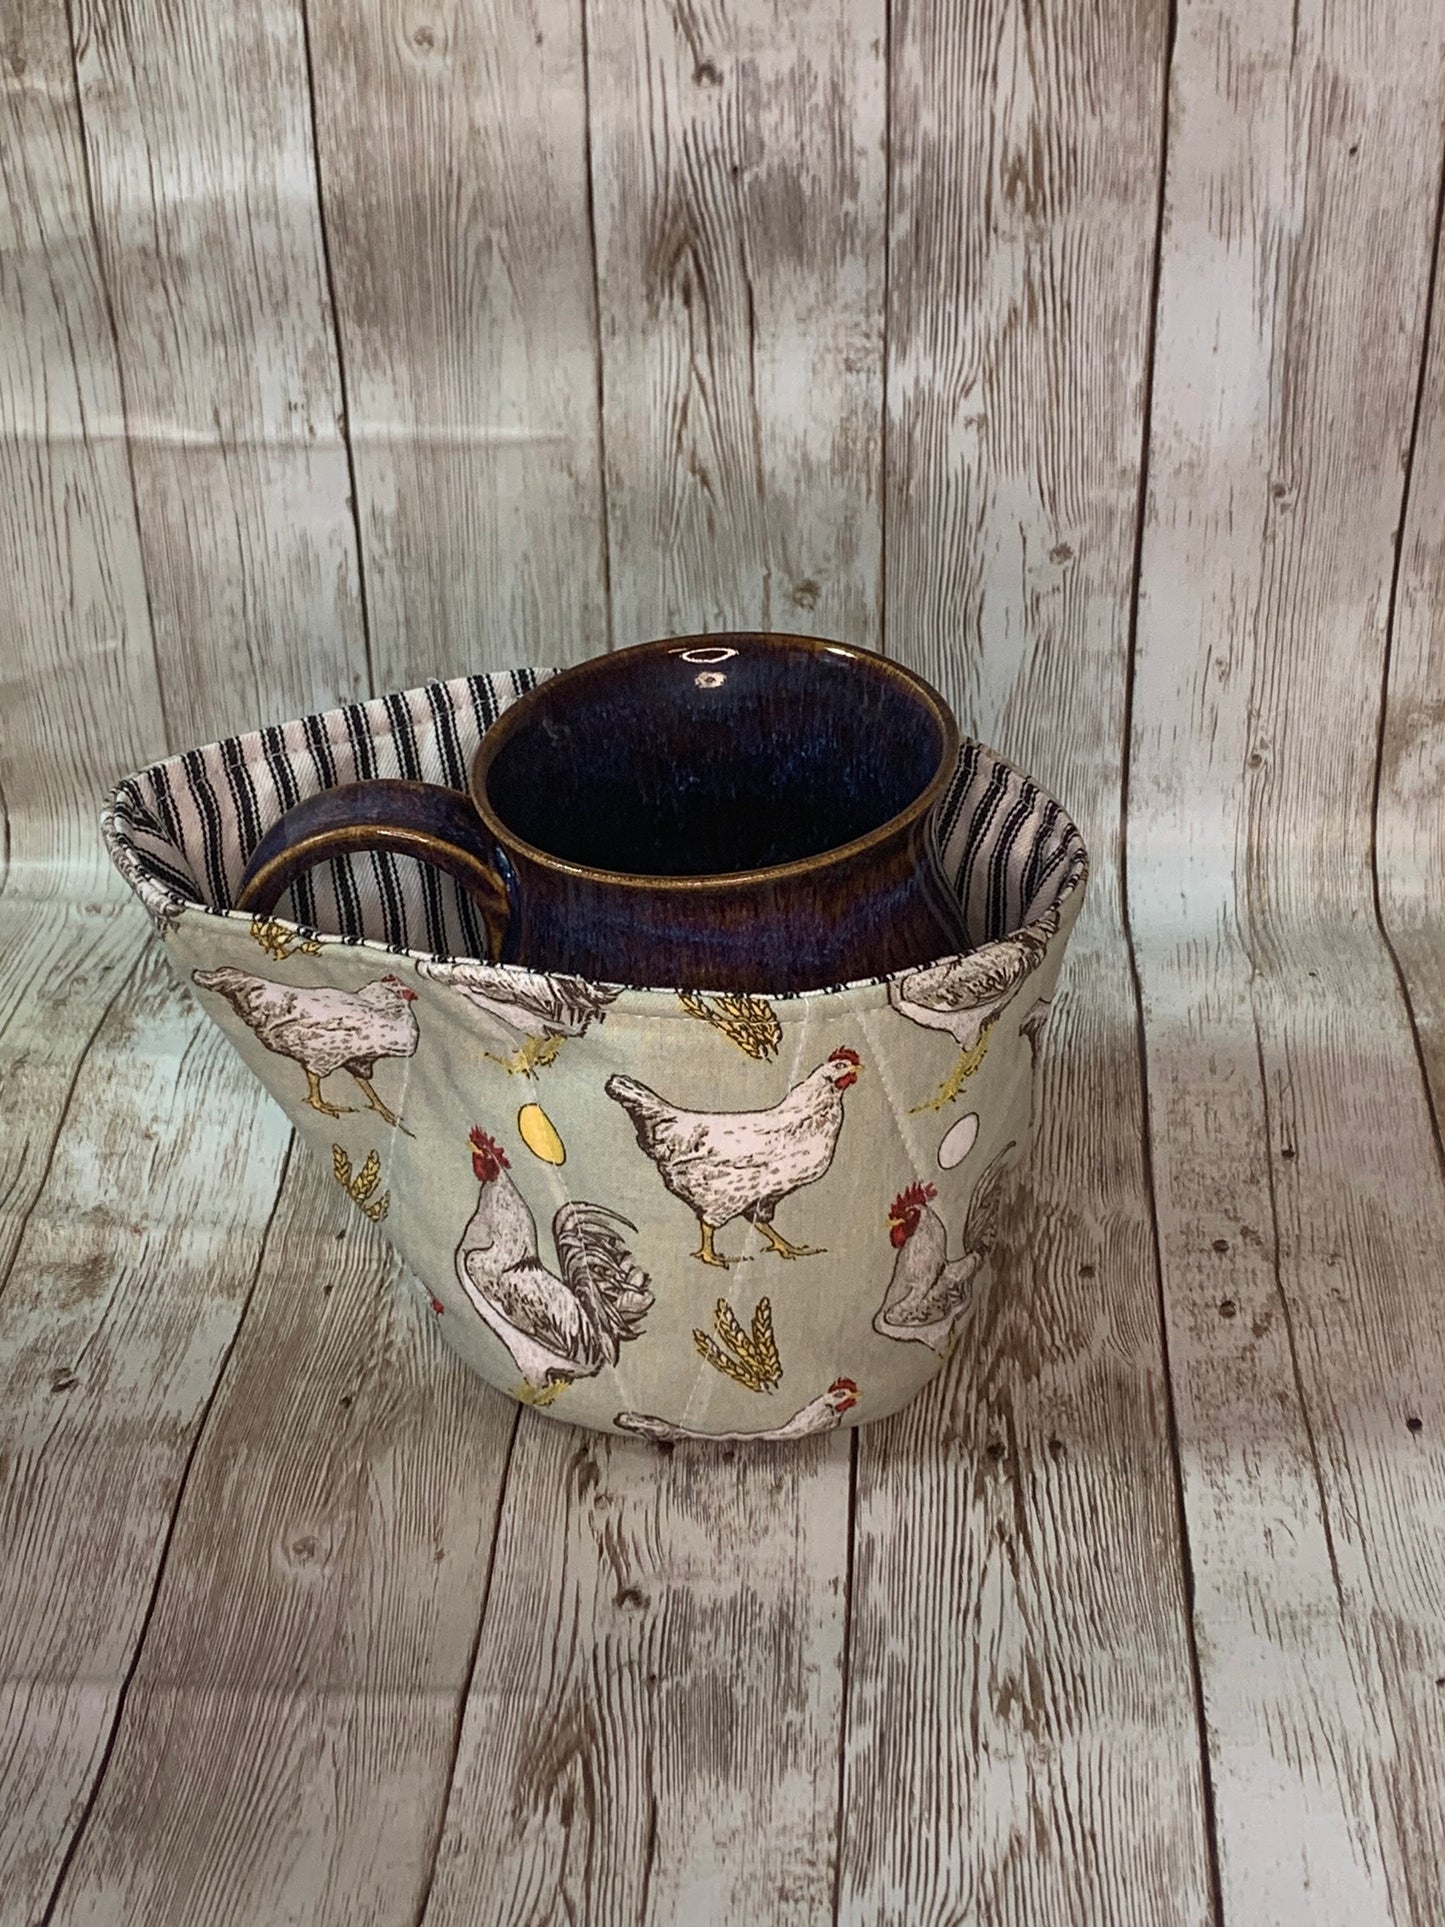 Chicken and Rooster Microwave Mug Cozy